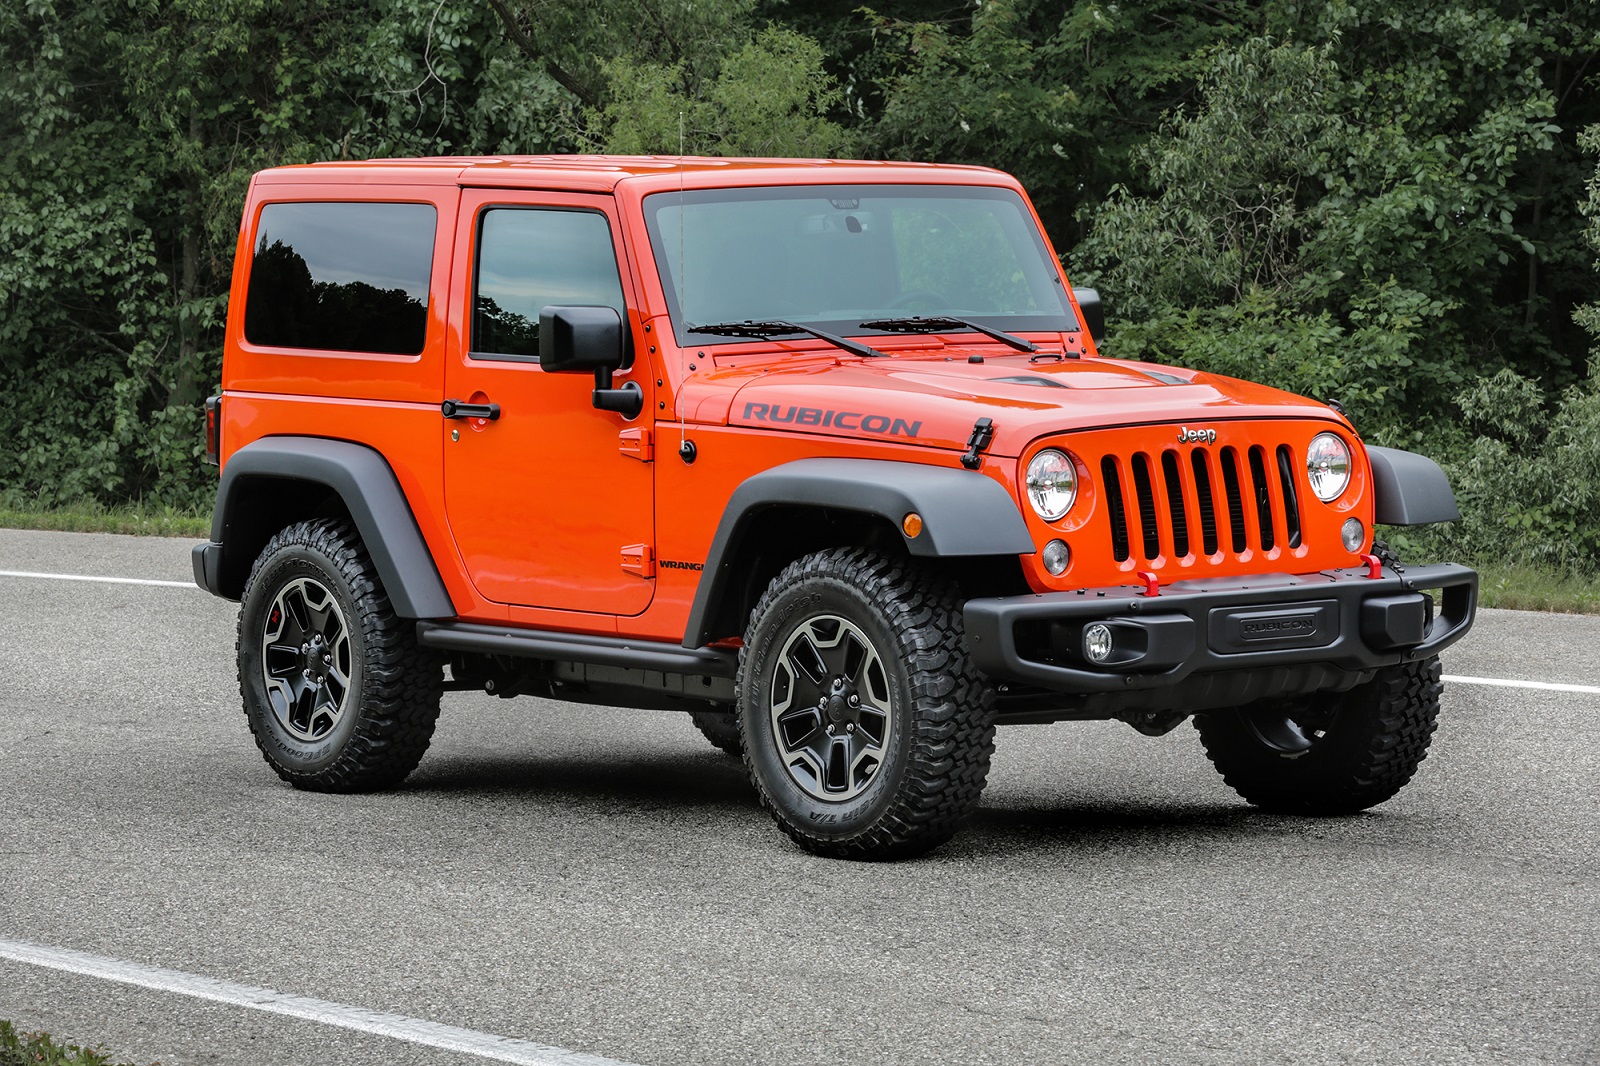 Jeep Sales Down 7 Percent in January, But There's Some Good News